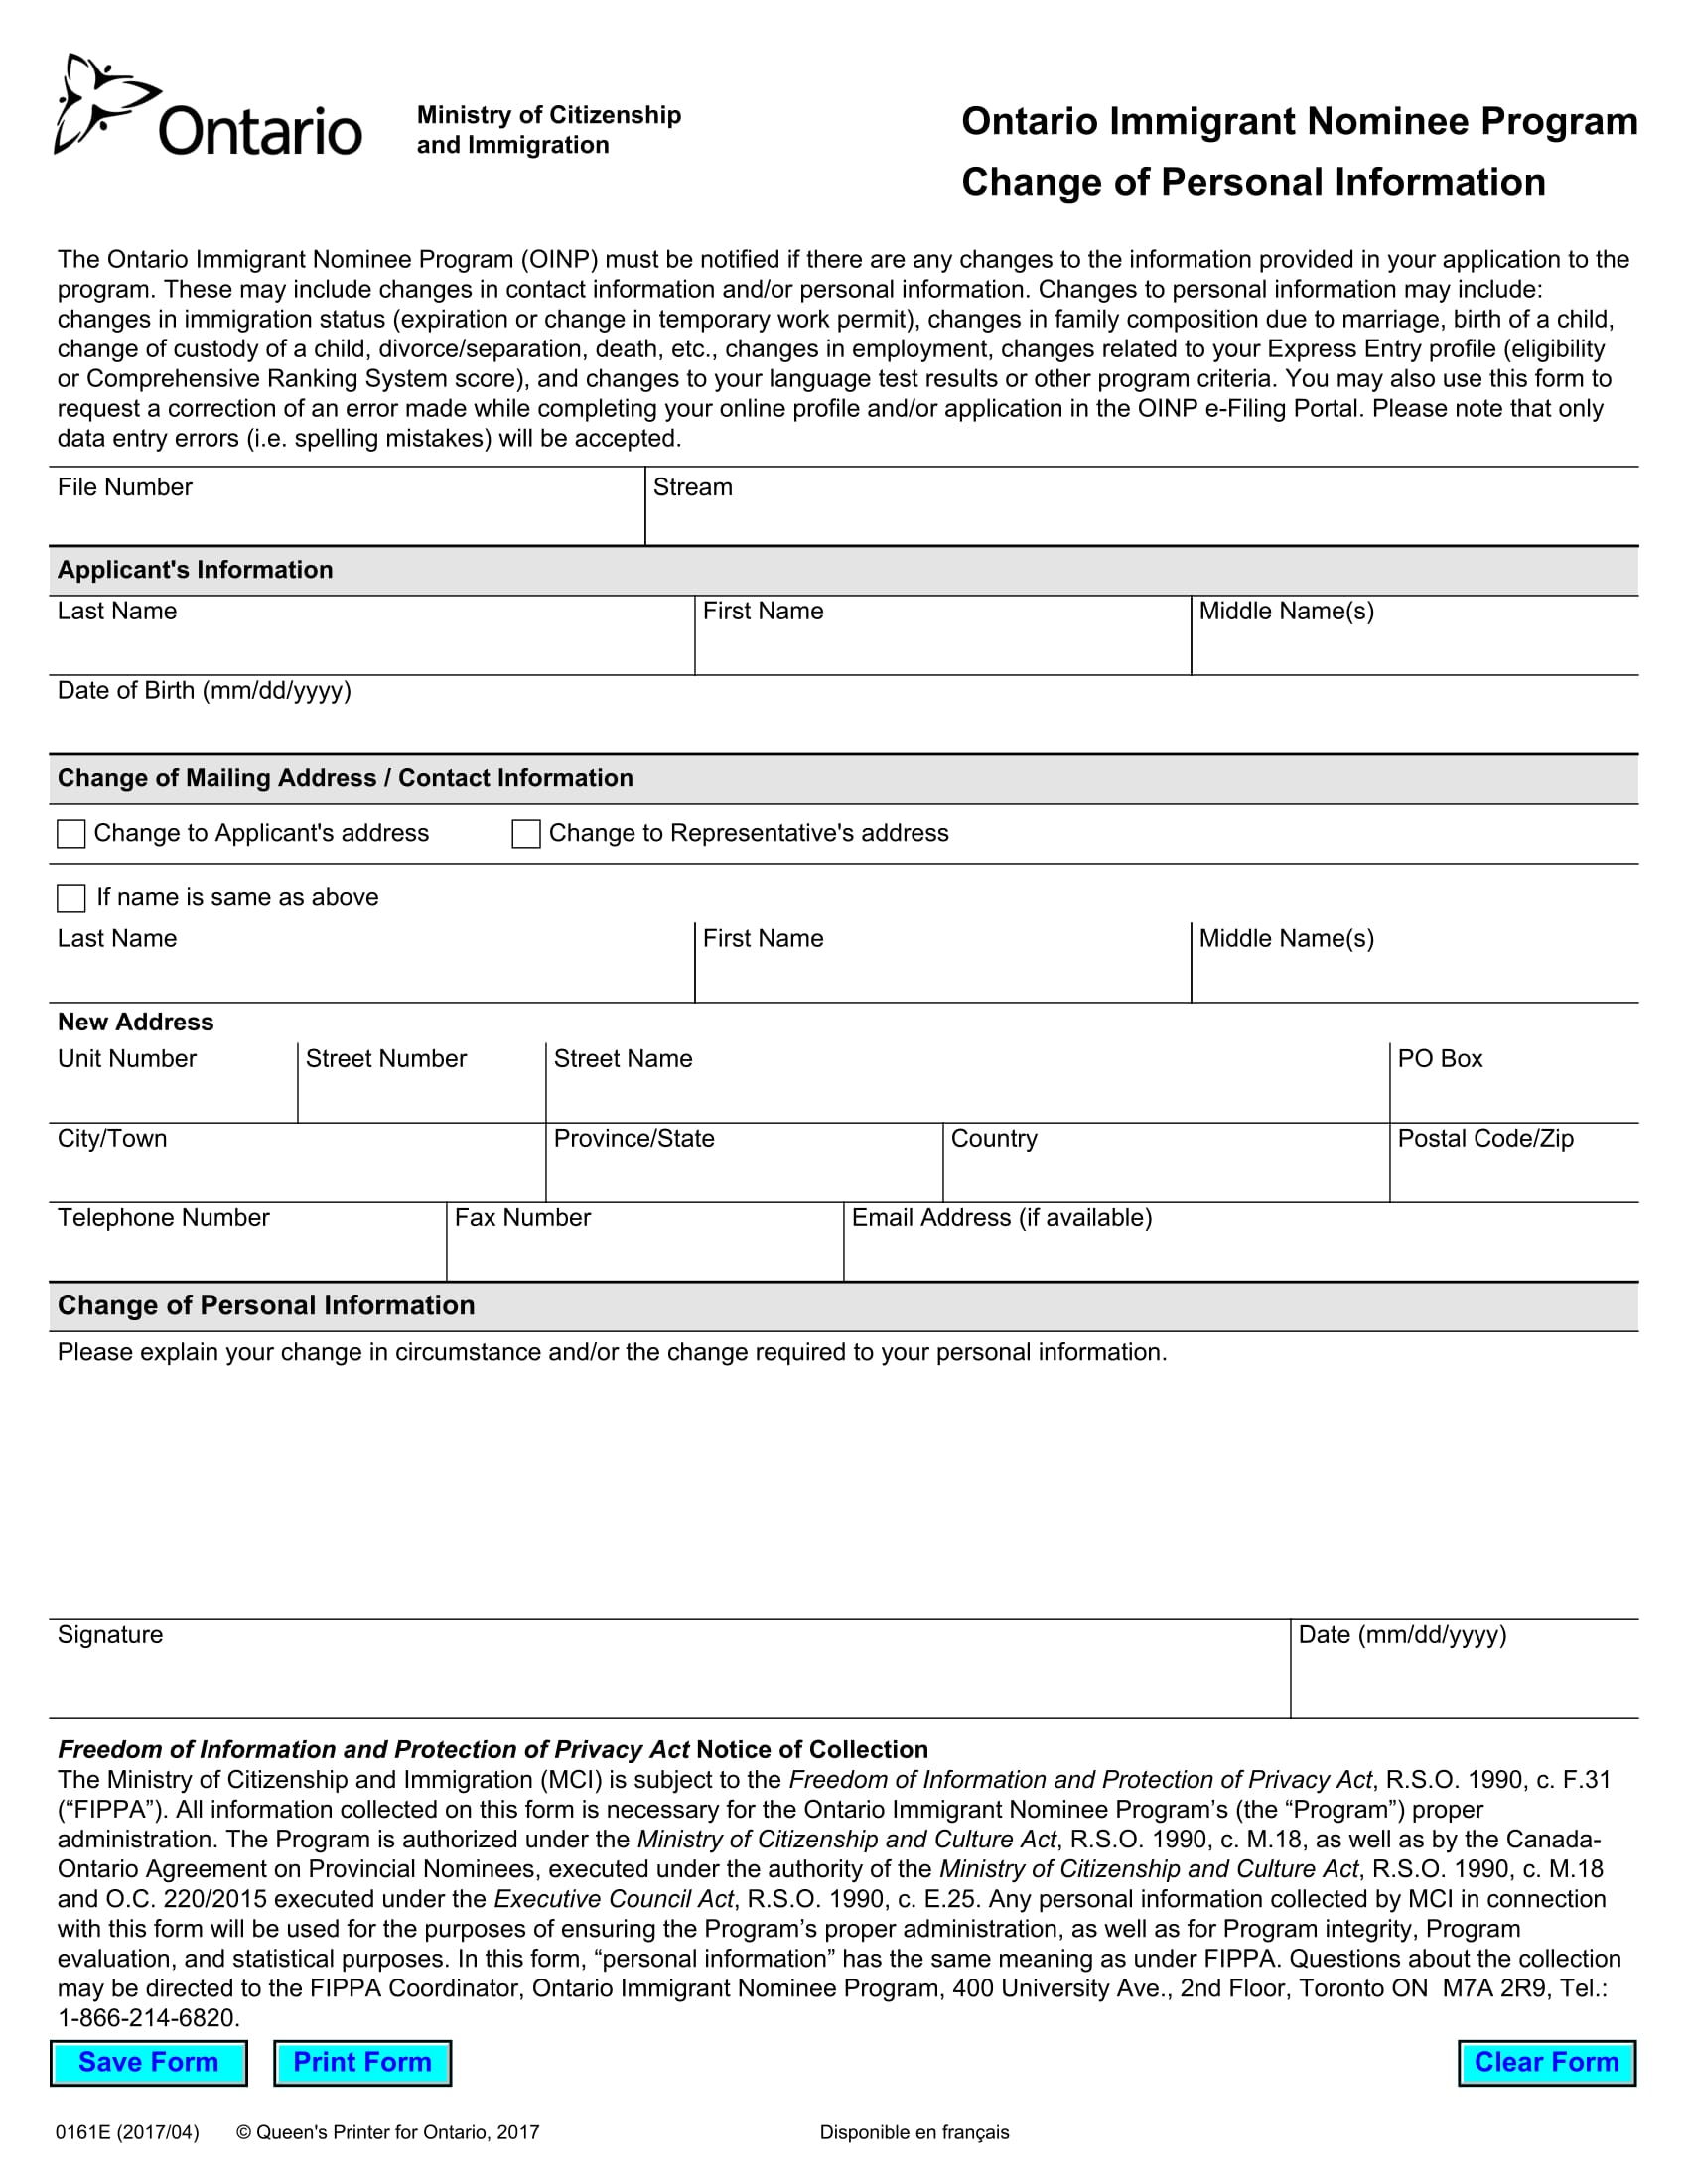 change of personal information form 1